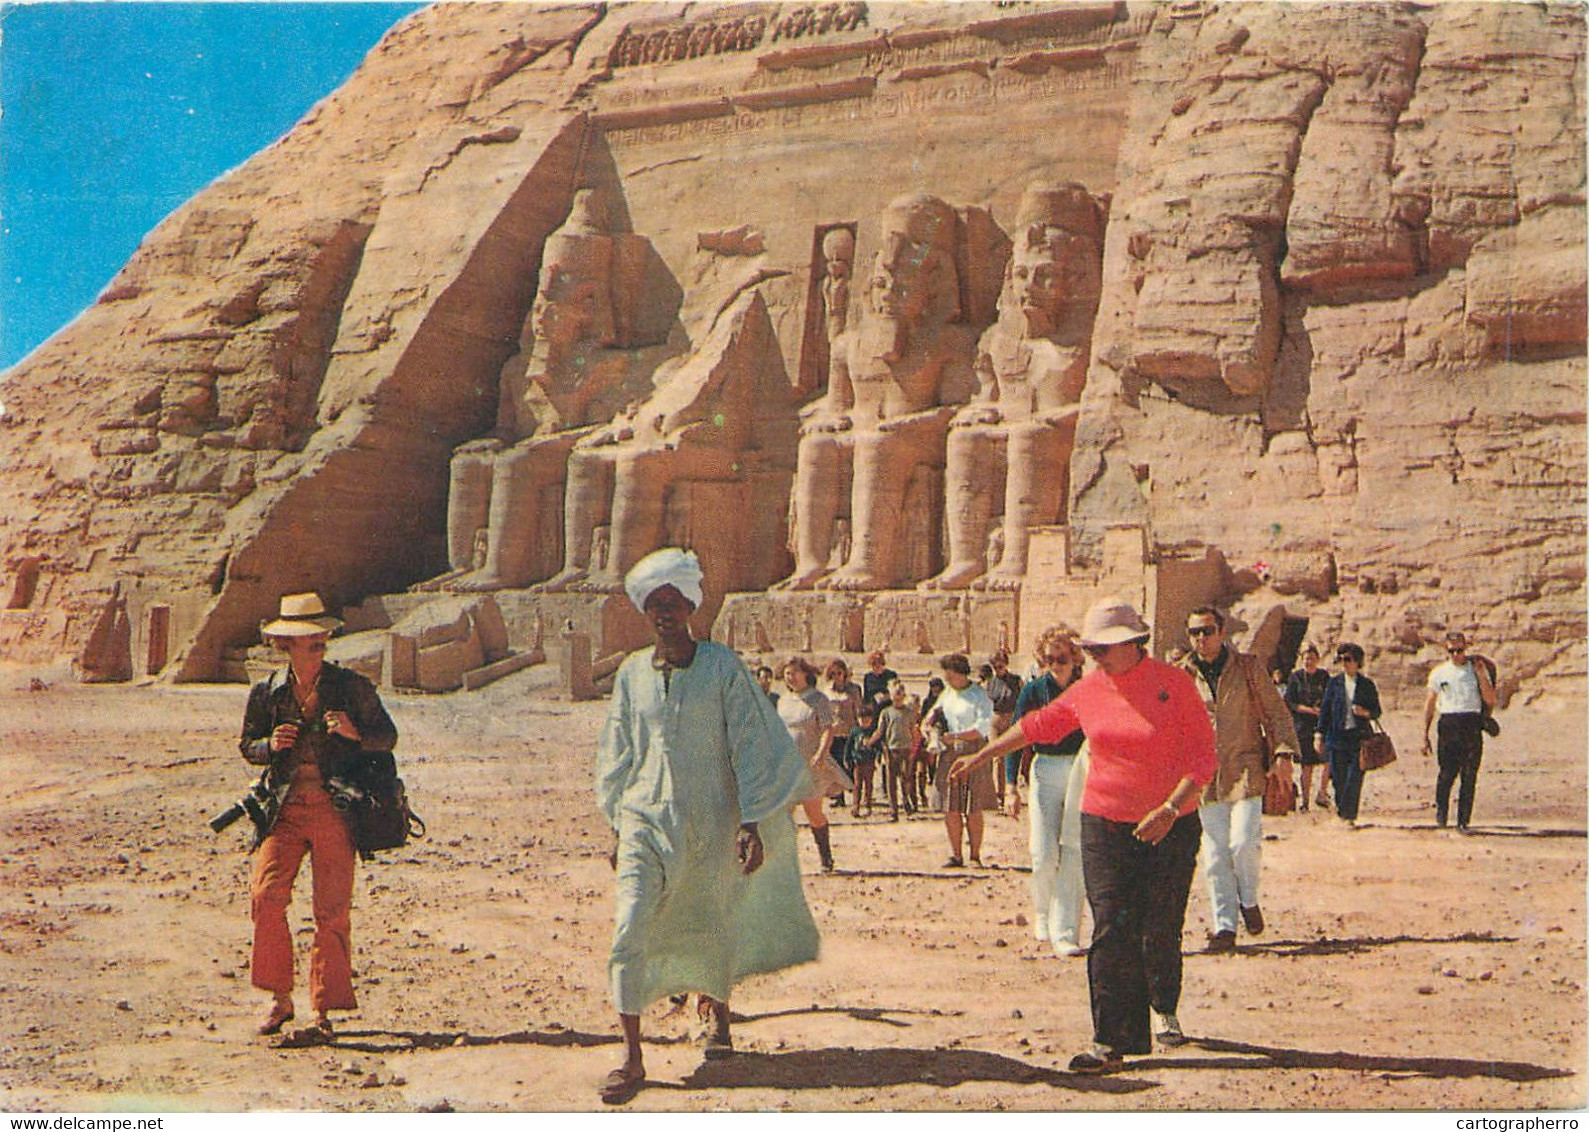 Postcard Egypt Abu Simbel Rock Temple Of Ramses II Gigantic Statues Partial View Ethnic Types And Scenes Tourists - Abu Simbel Temples